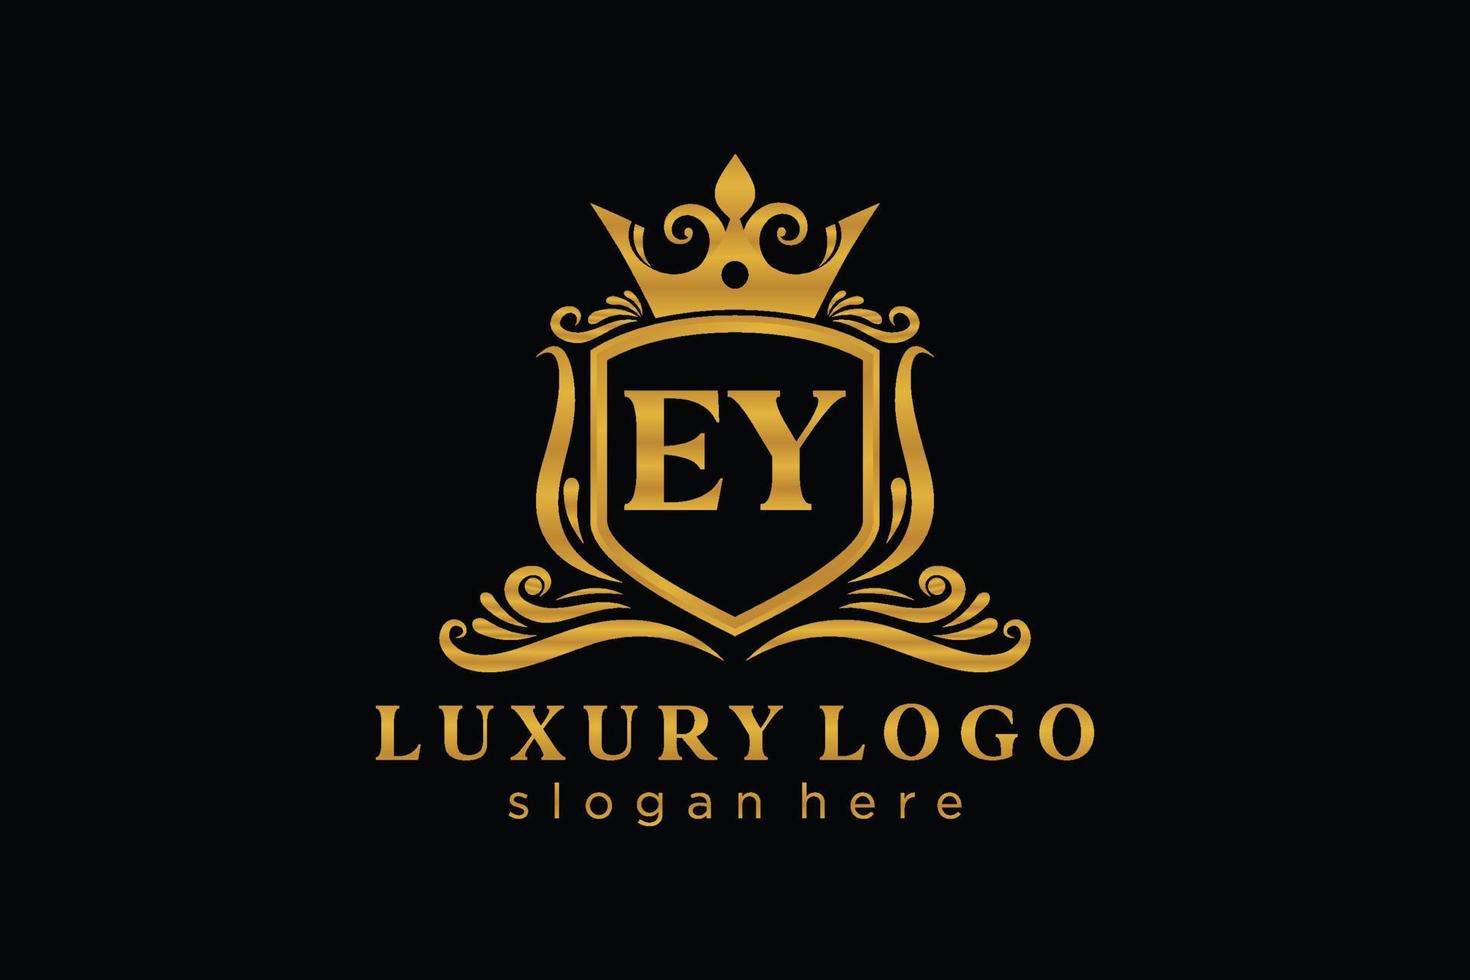 Initial EY Letter Royal Luxury Logo template in vector art for Restaurant, Royalty, Boutique, Cafe, Hotel, Heraldic, Jewelry, Fashion and other vector illustration.